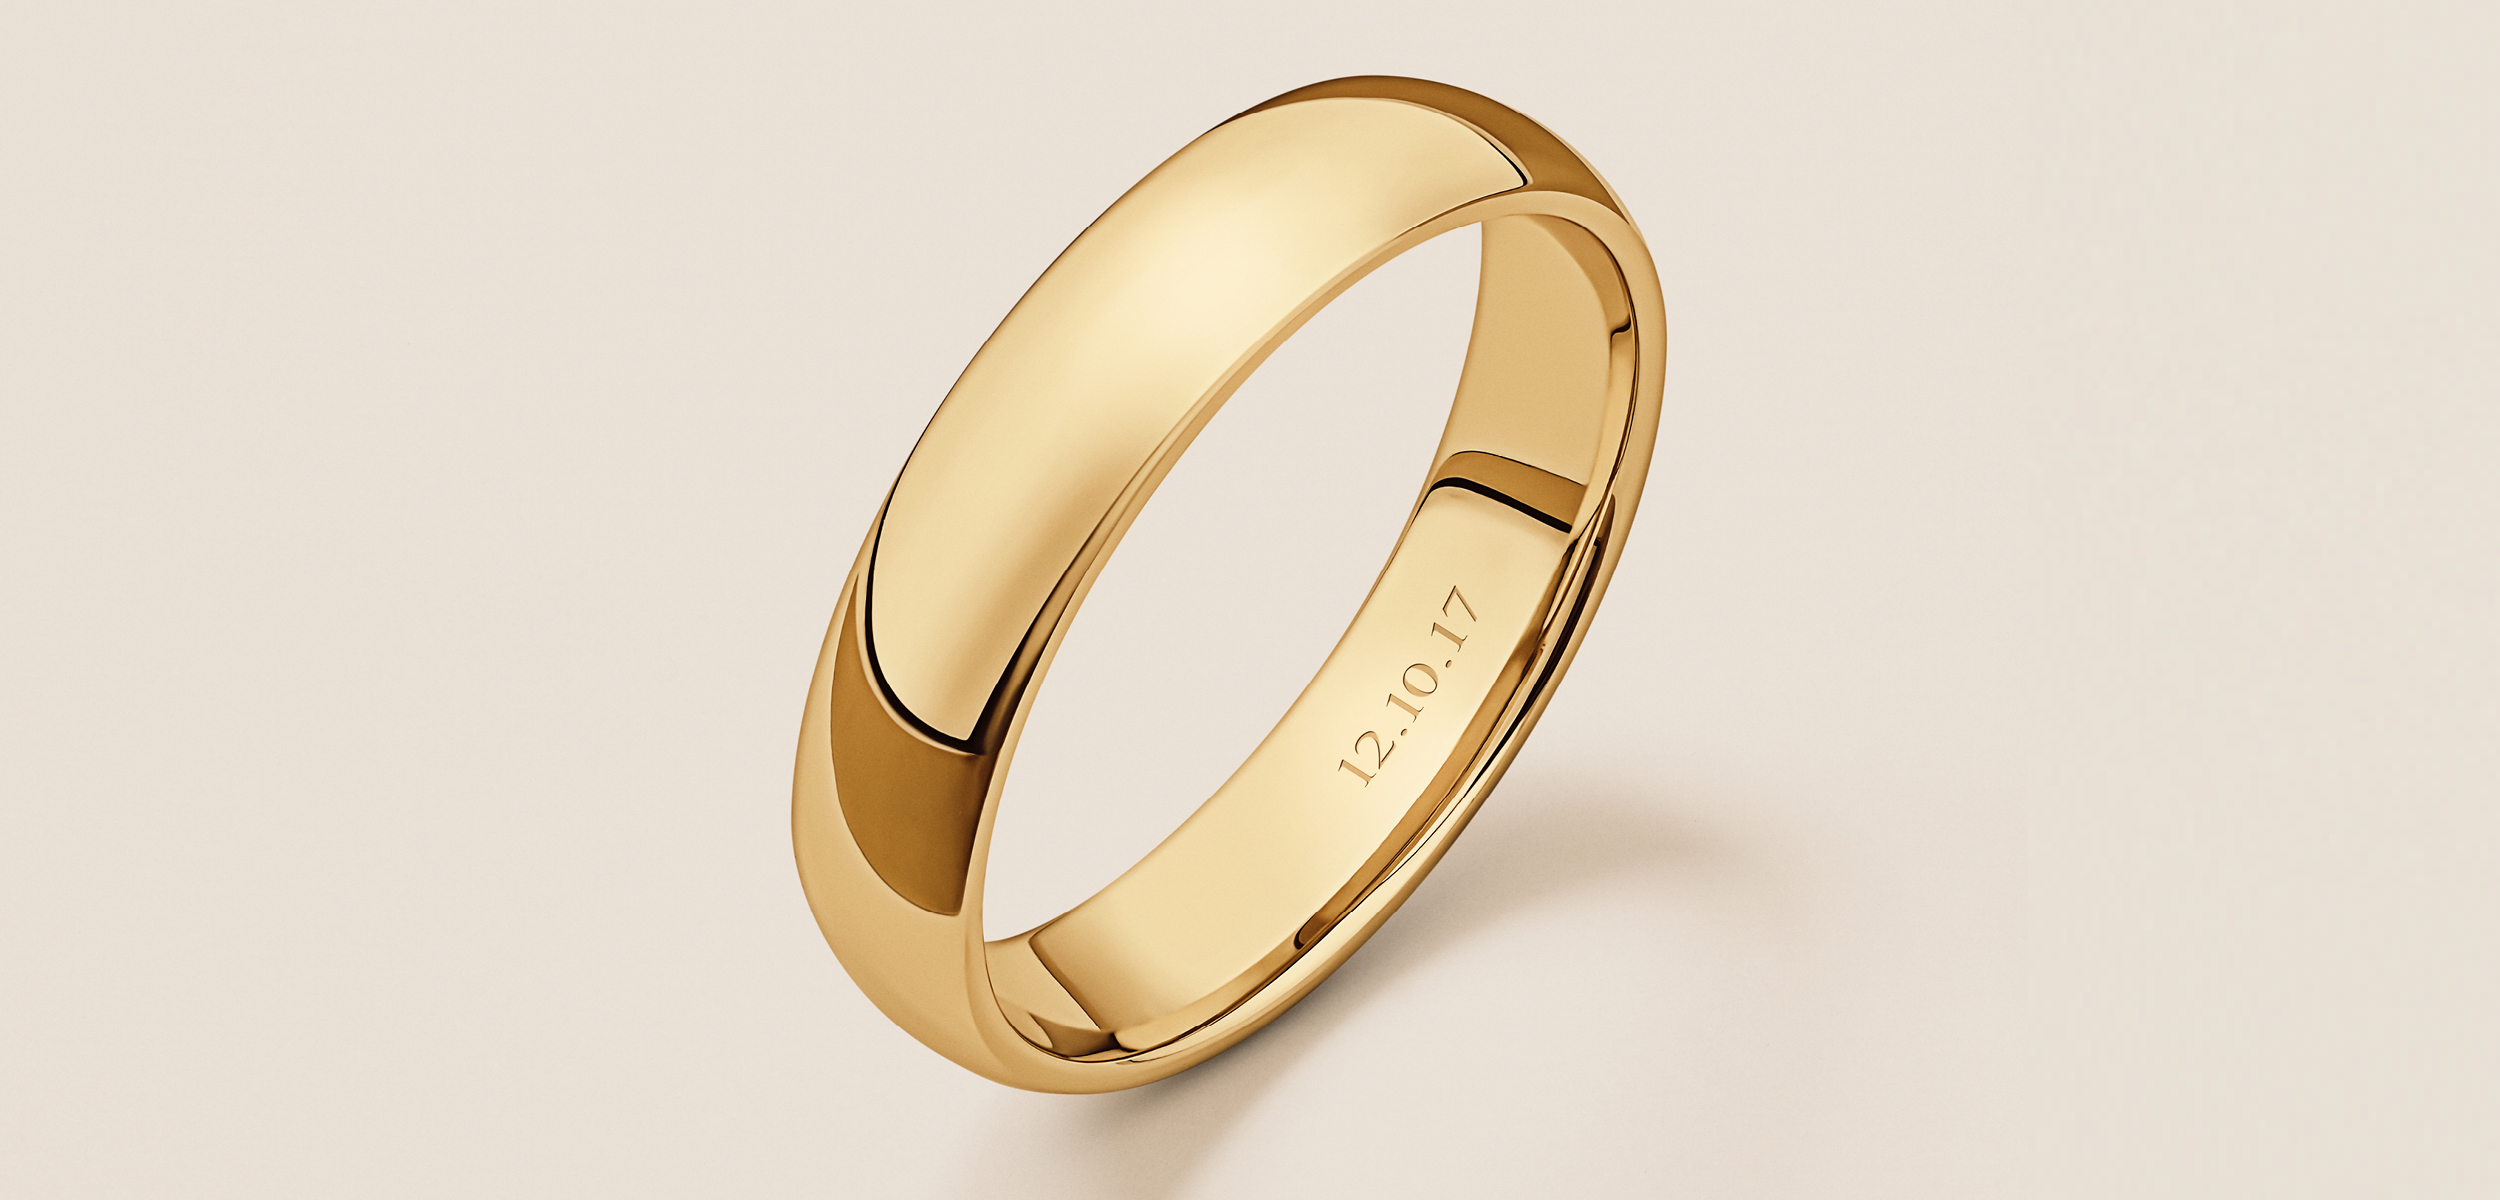 Yellow Gold wedding band engraved with a significant date